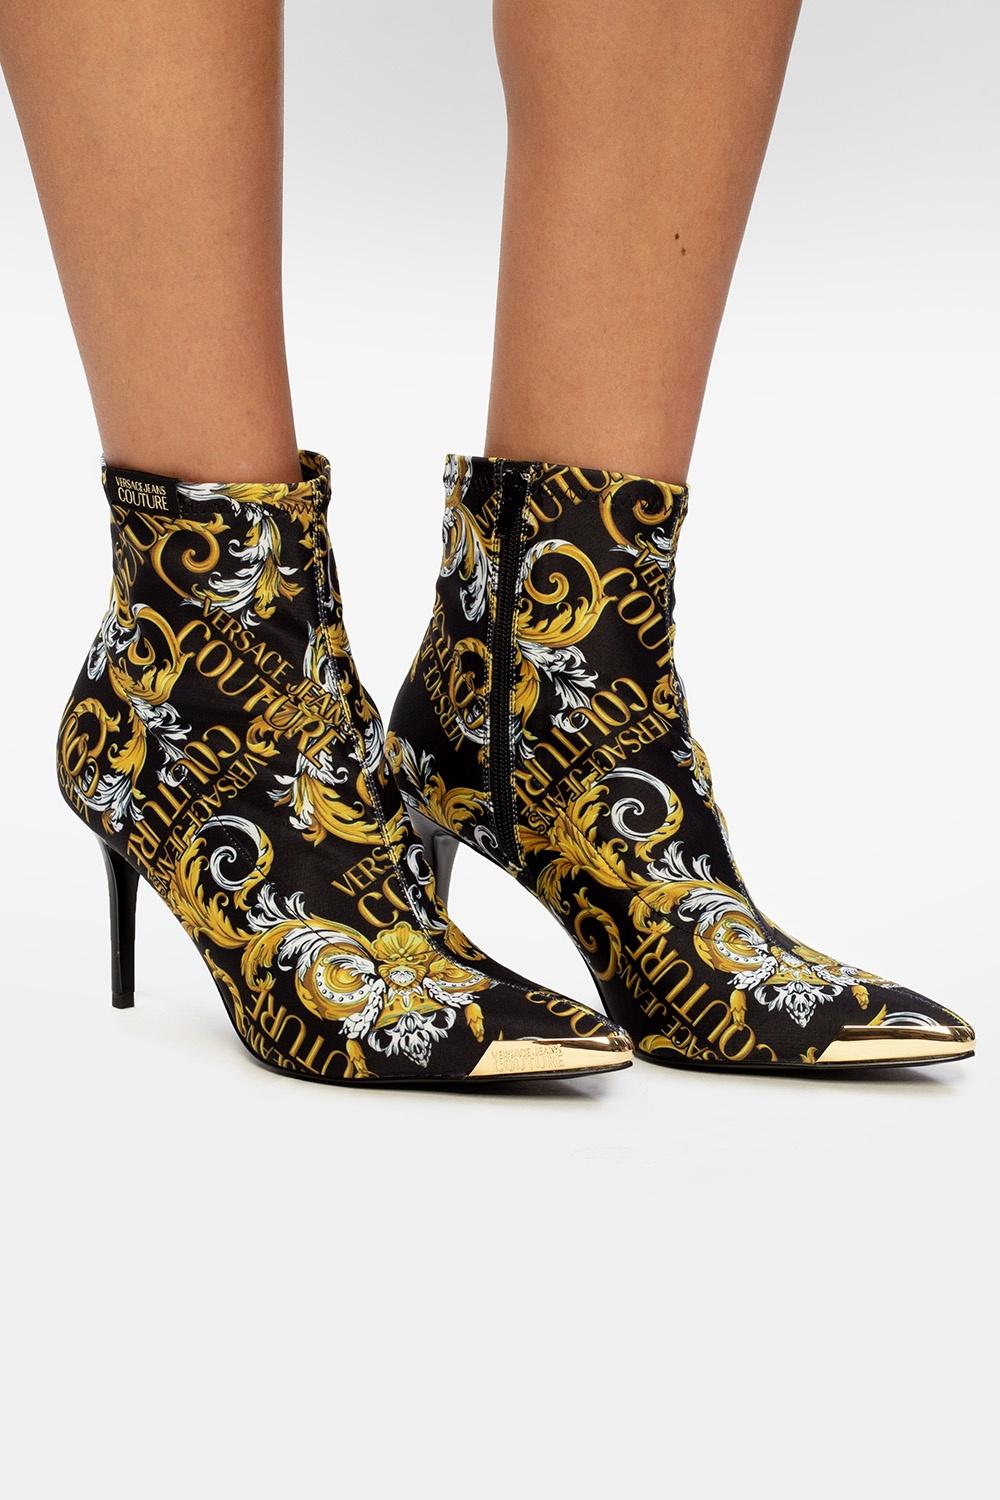 Versace Jeans Denim Heeled Ankle Boots in Black - Lyst